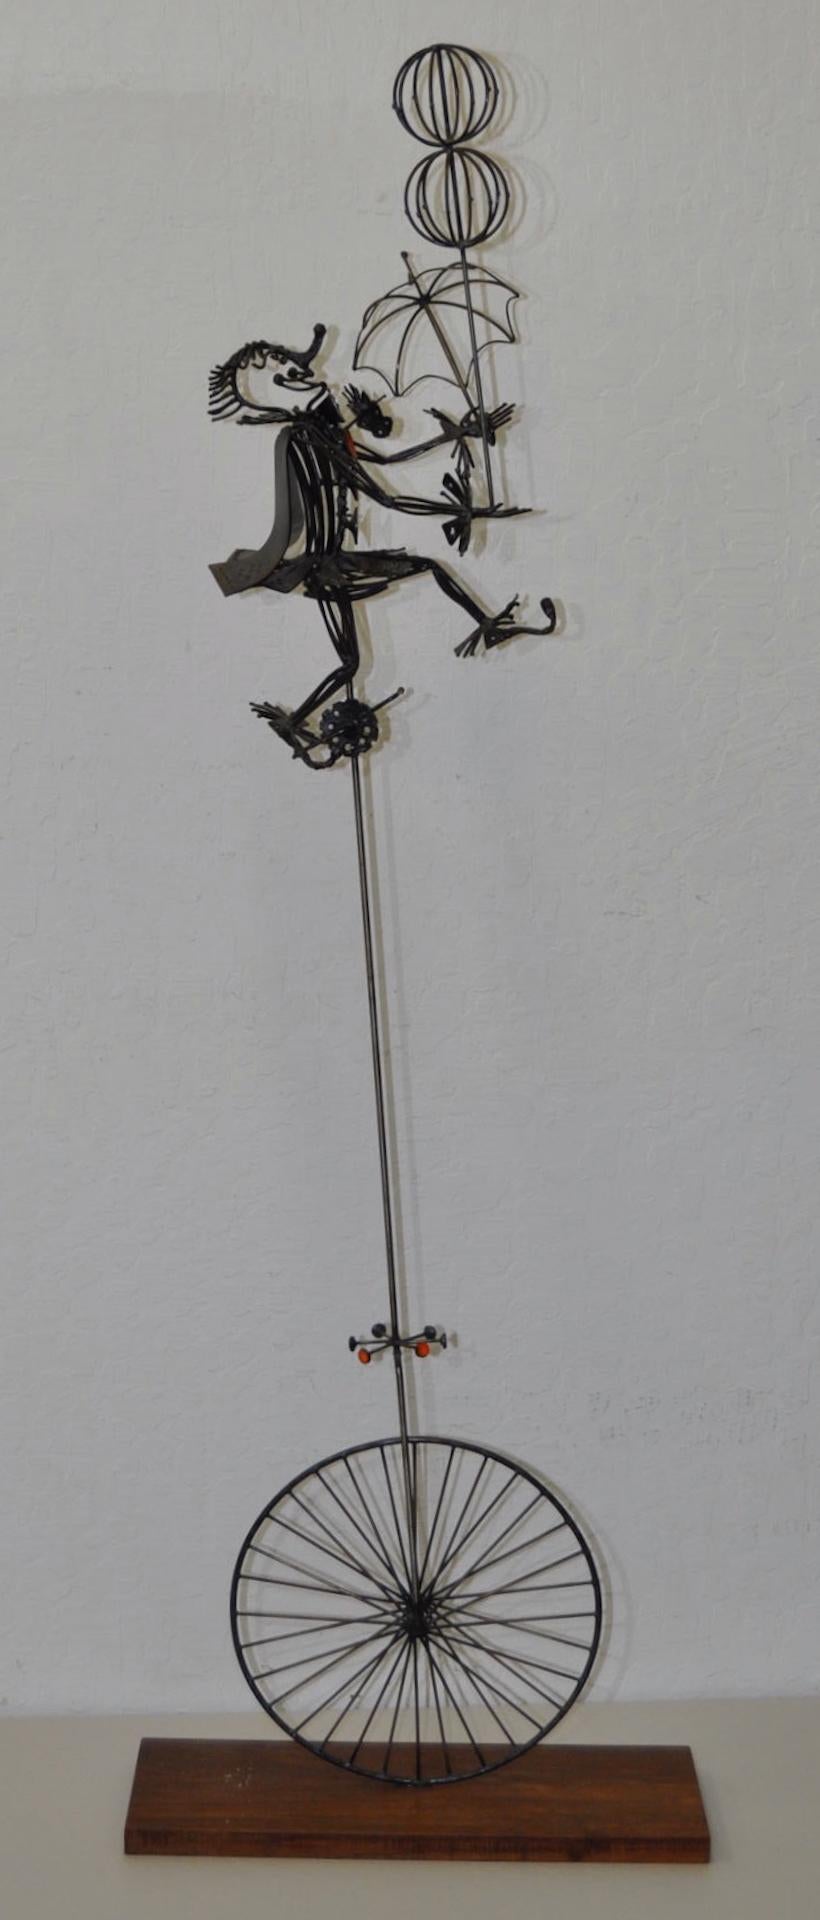 Joseph Burlini (American, B.1937) metal sculpture with enamel highlights, circa 1969

Whimsical metal and enamel sculpture by noted sculptor Jospeh Burlini.

This clown is riding high on his unicycle as he shows off a balancing act for the